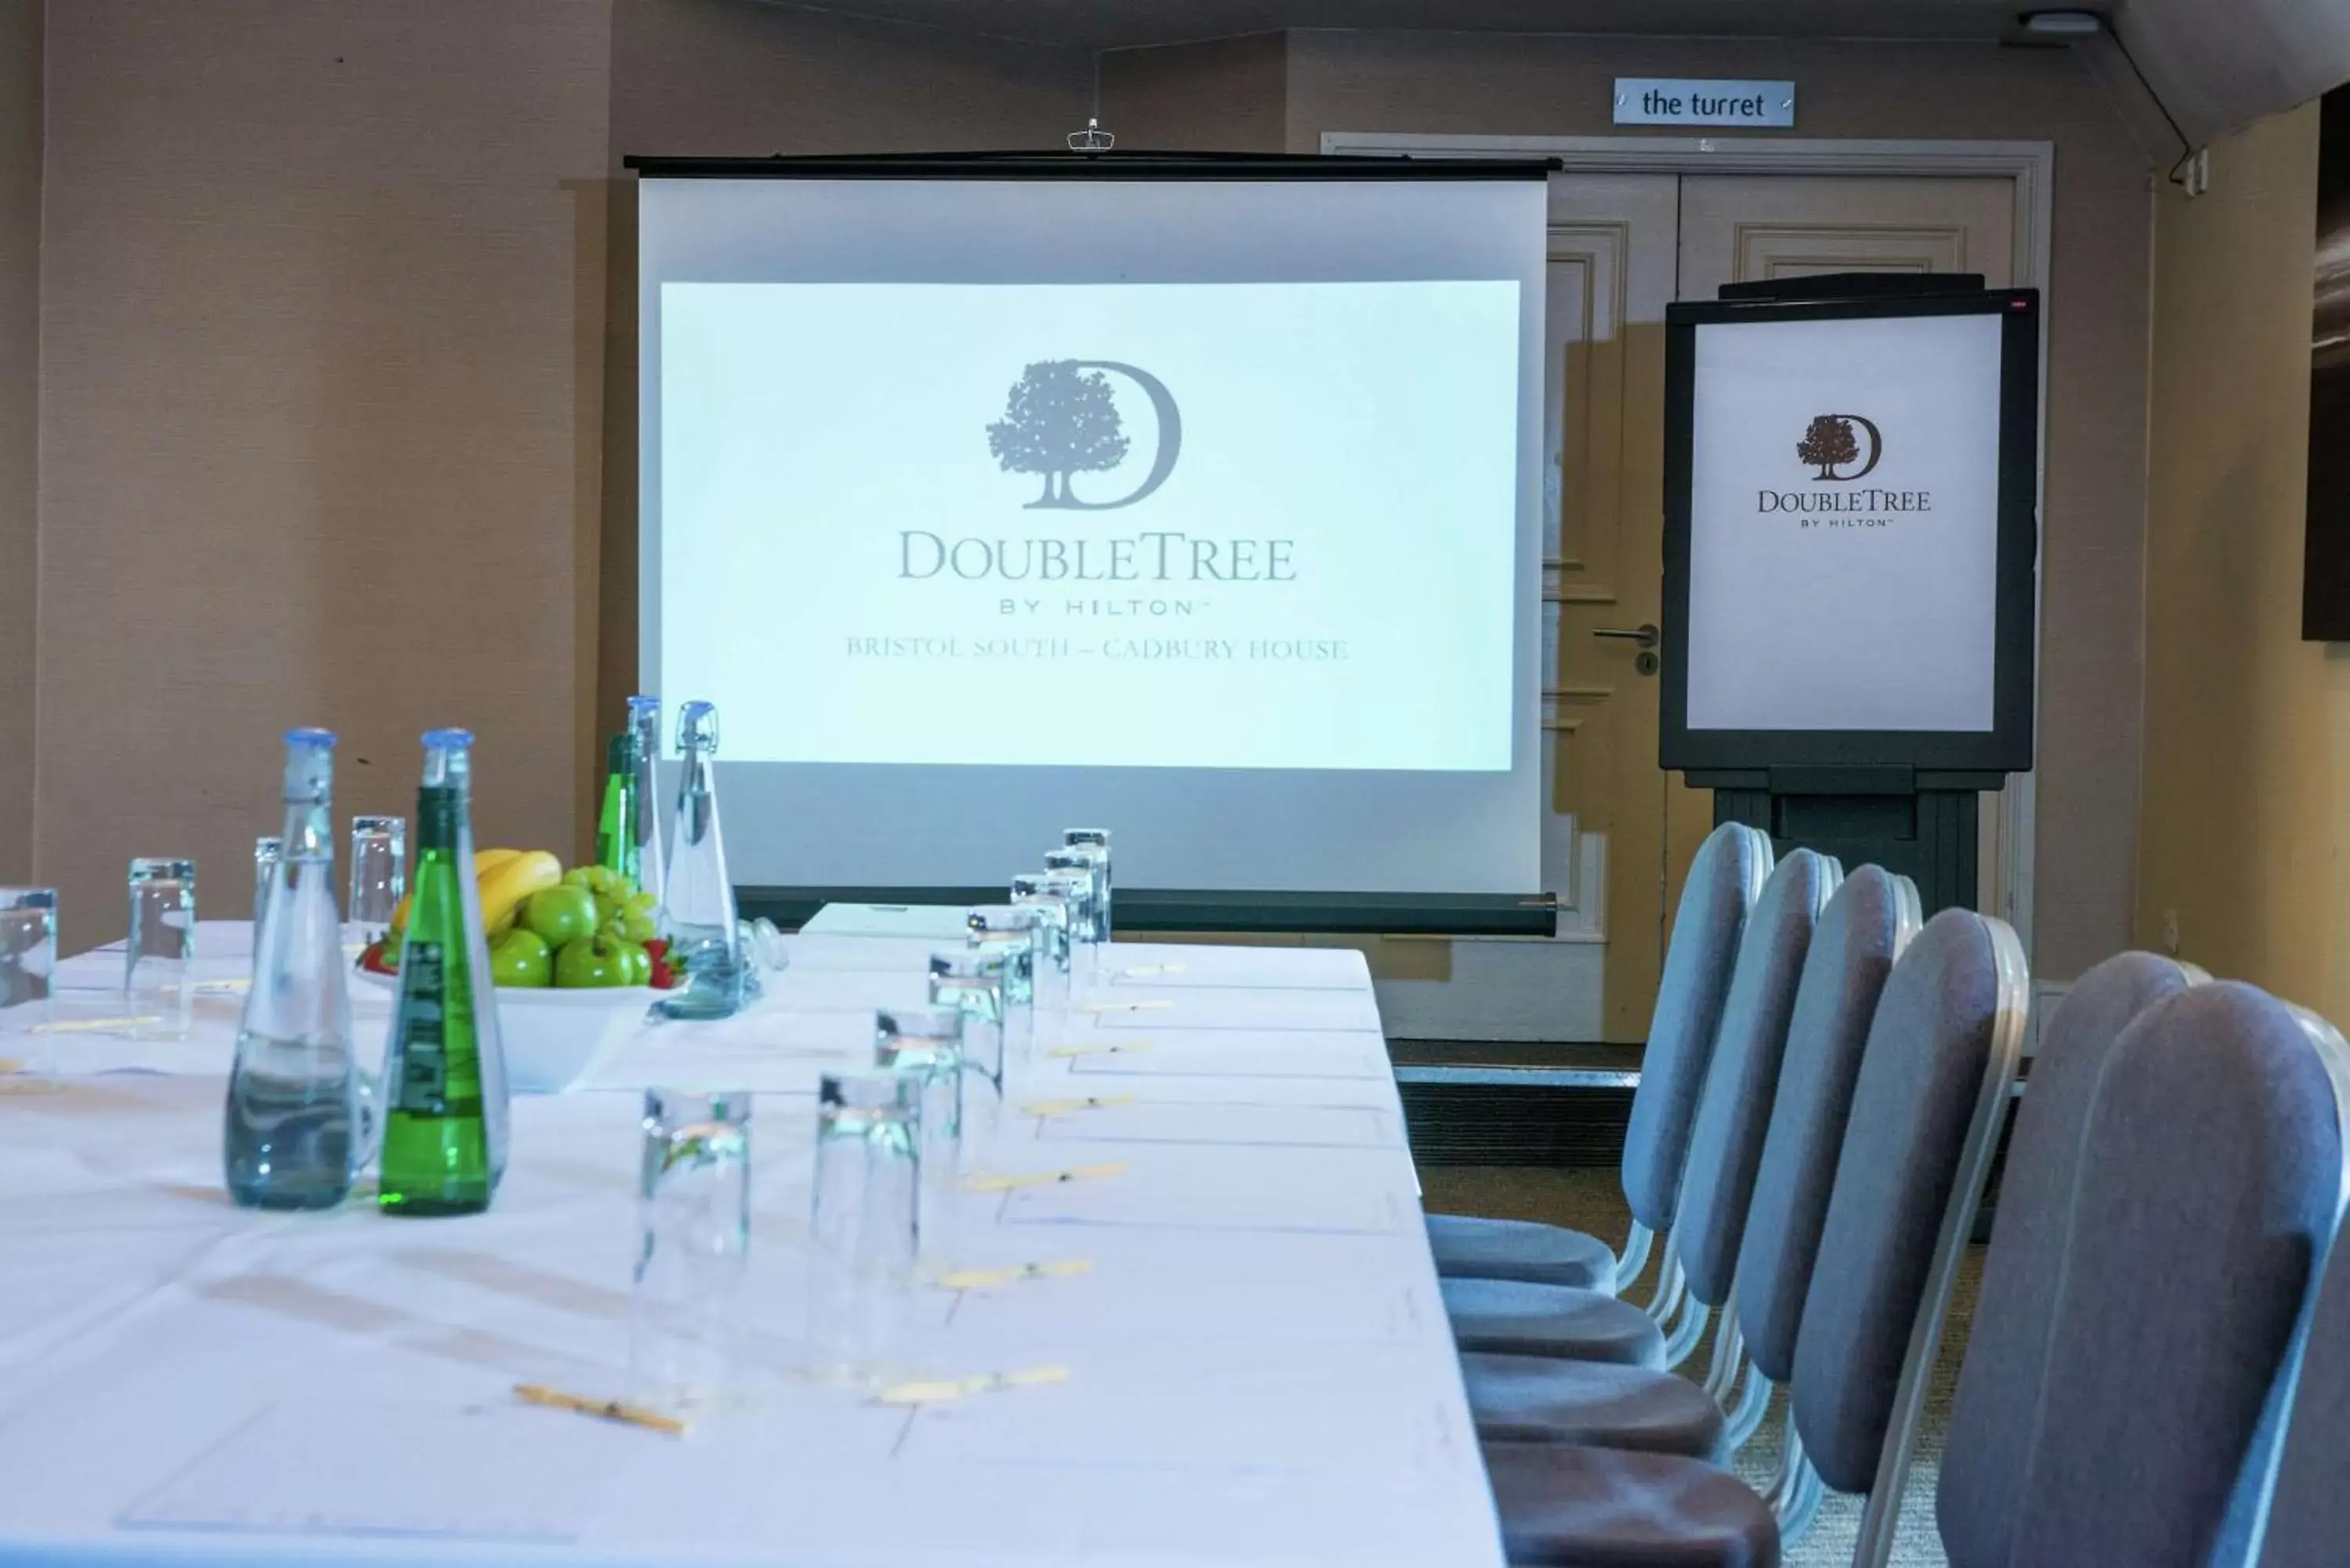 Meeting/conference room in DoubleTree by Hilton Bristol South - Cadbury House